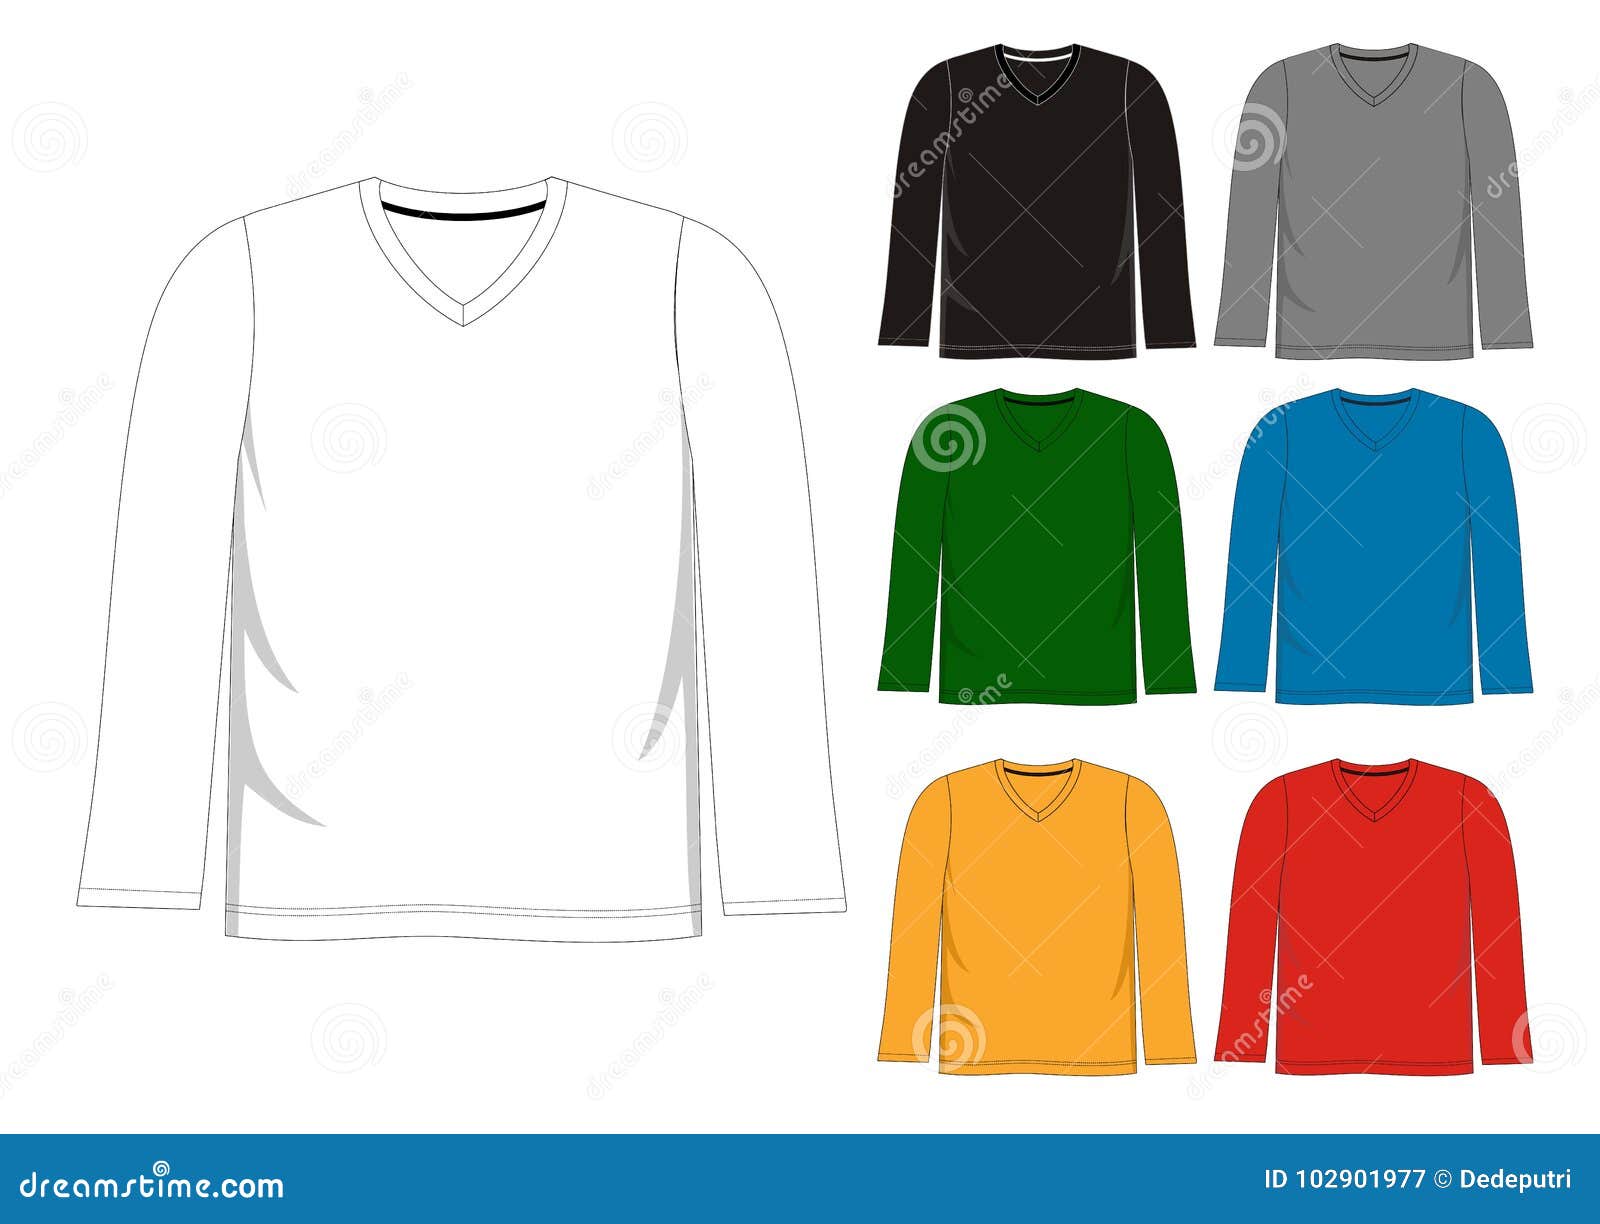 Template t shirt v-neck stock vector. Illustration of casual - 102901977